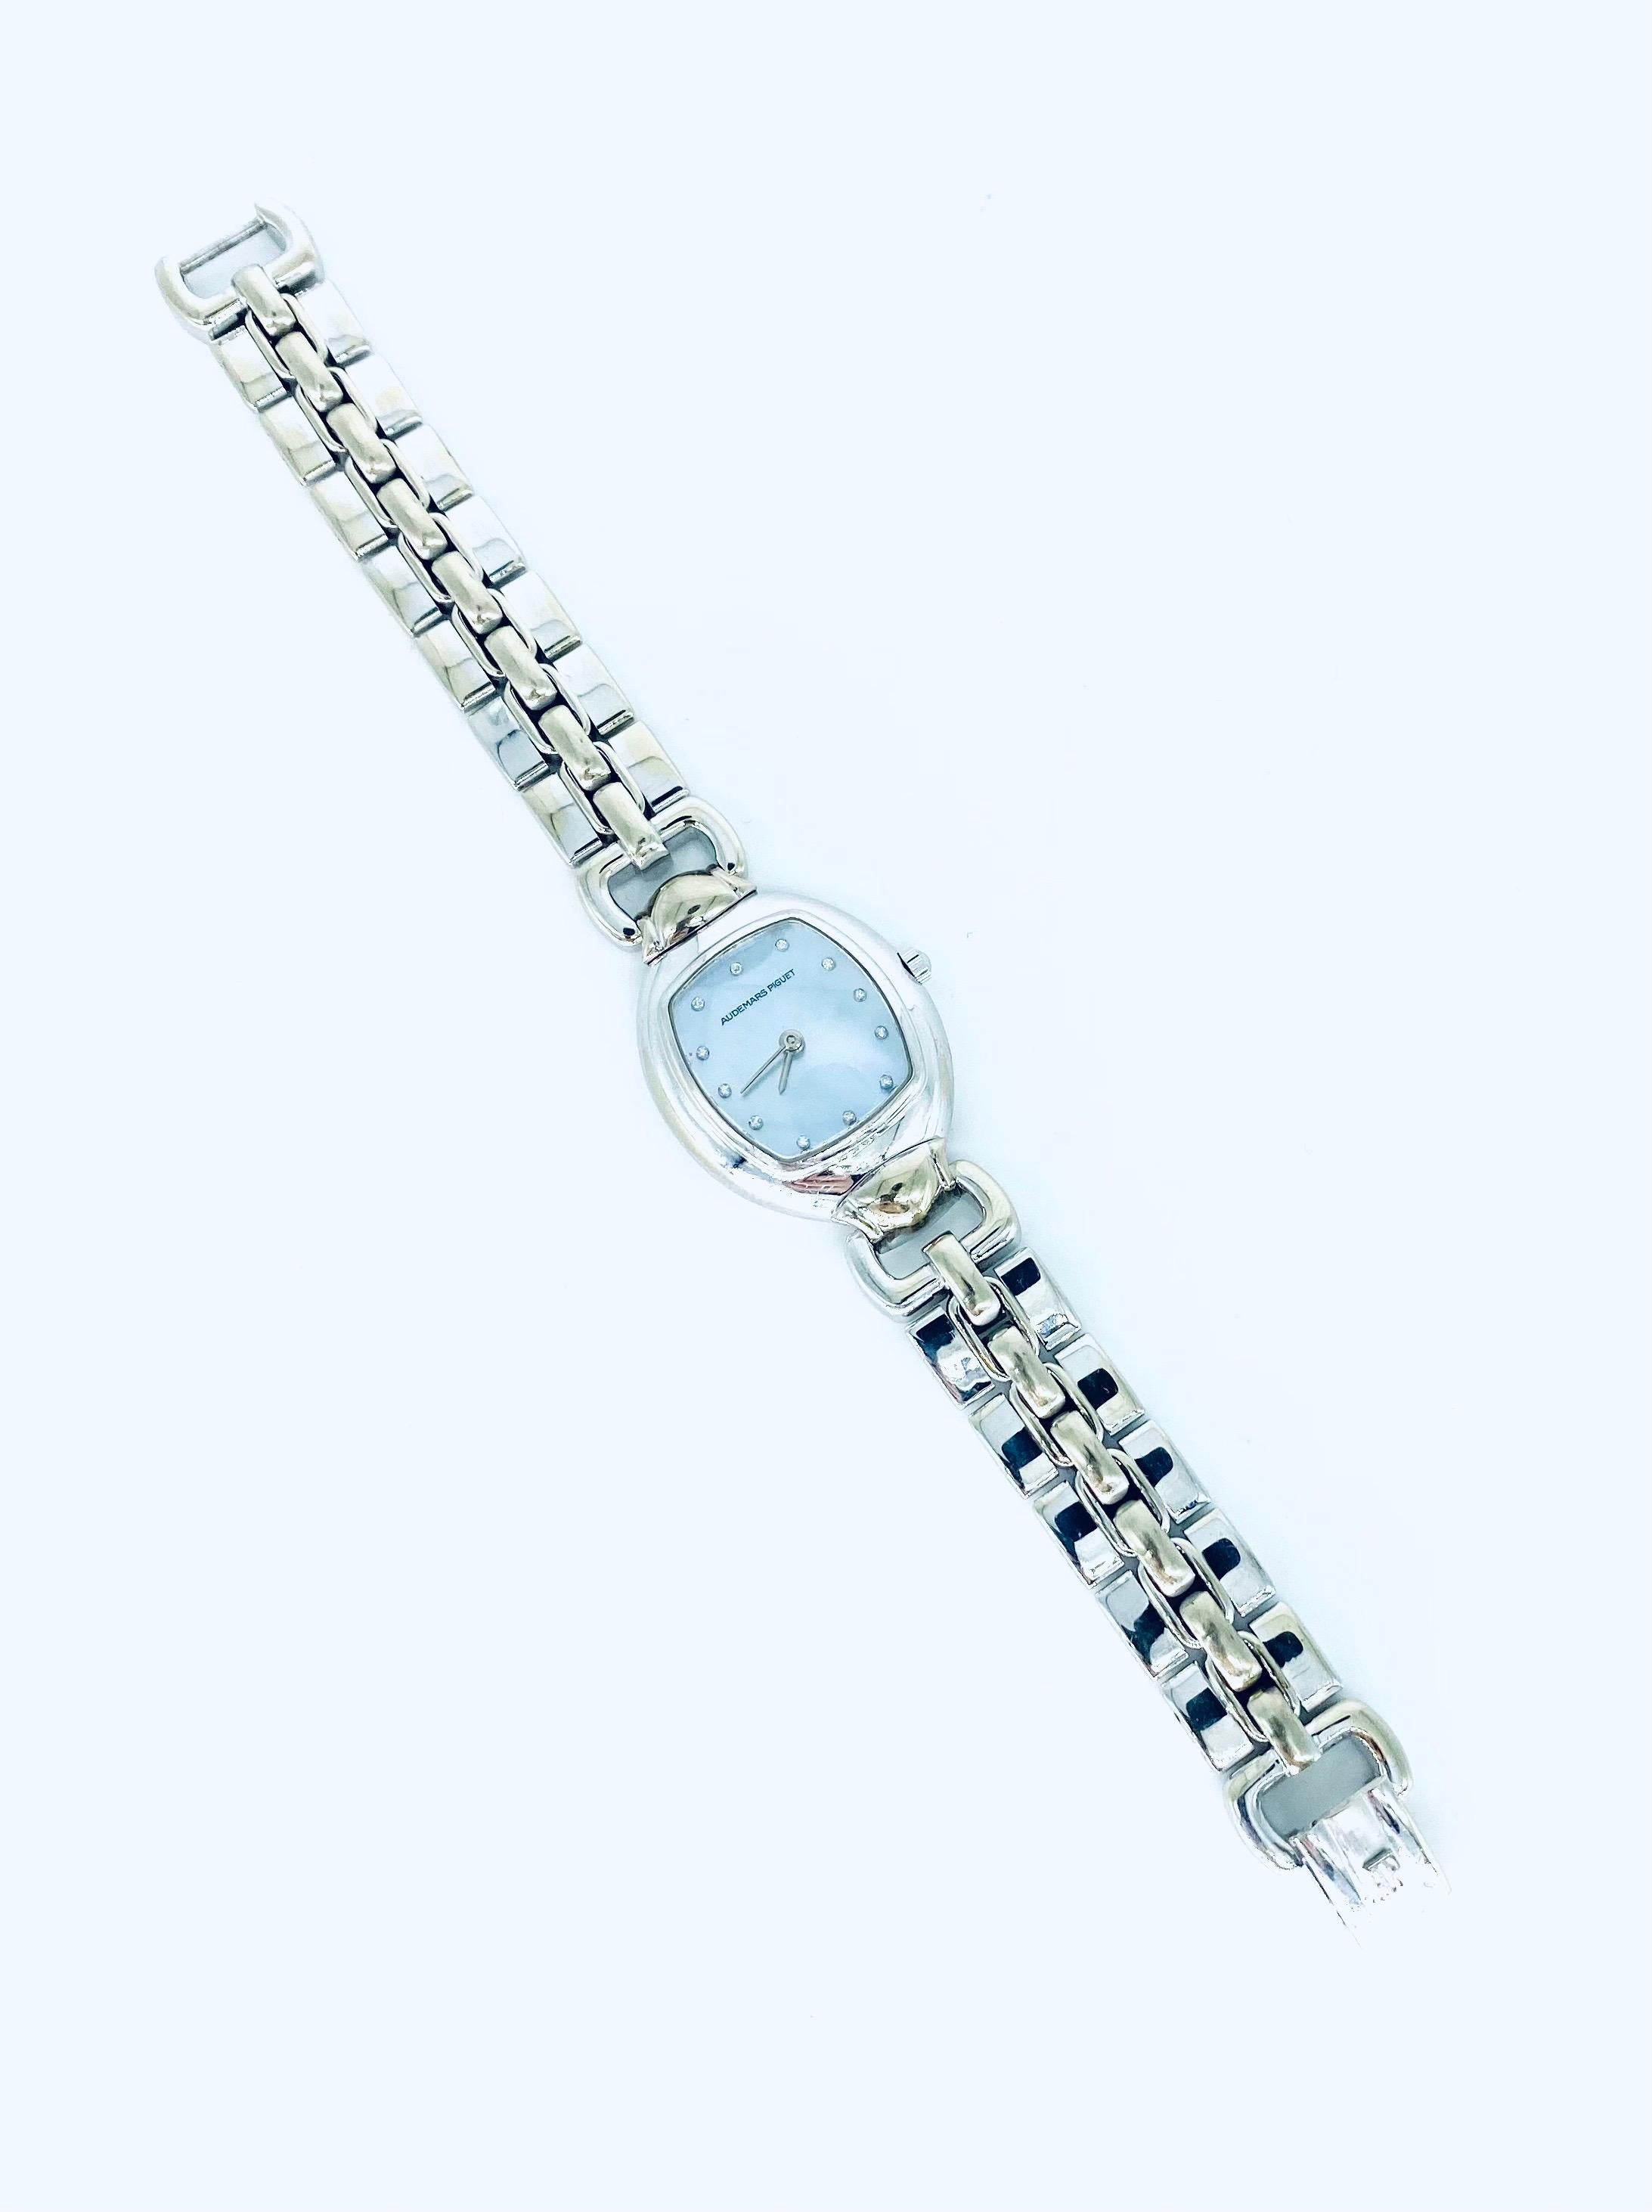 A glamorous and stunning ladies 18k white gold Audemars Piguet wristwatch, with a striking and heavy bracelet, a contemporary cushion-style case, and a gorgeous blue-grey mother-of-pearl dial adorned with 12 diamond hour markers. The case is approx.